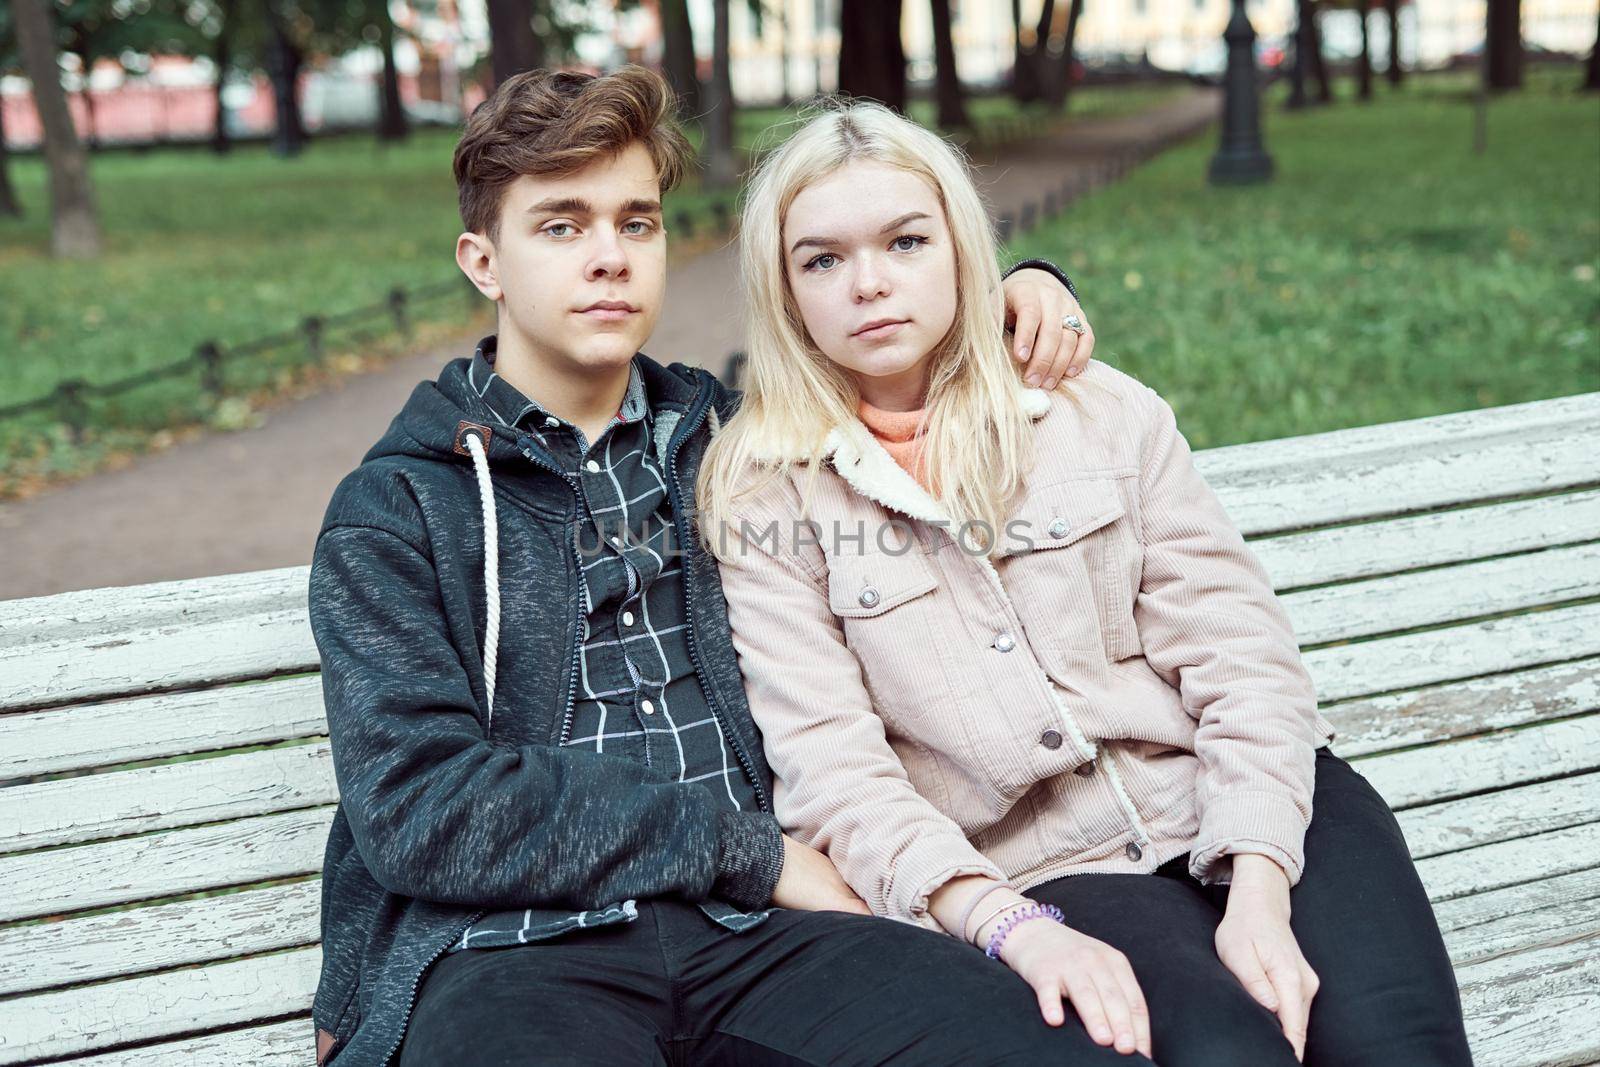 Teenagers in love sit on park bench in autumn, looking straight ahead. Concept of teen love by NataBene